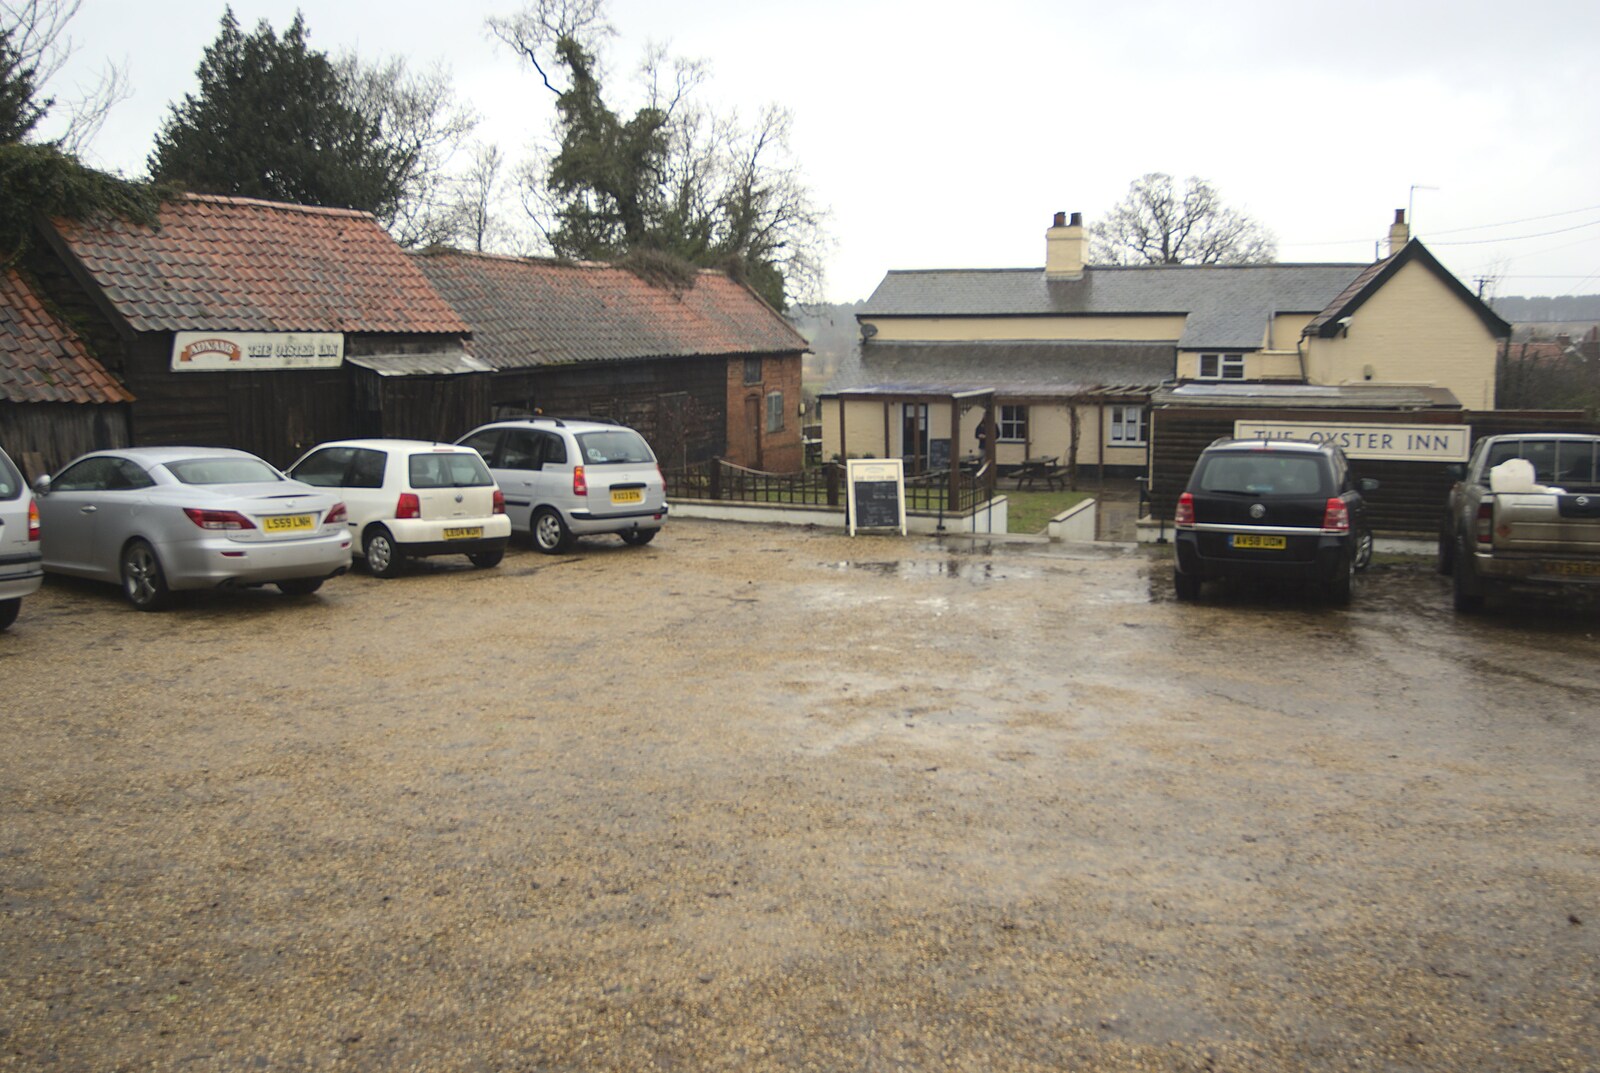 The Oyster Inn car park from The BBs with Ed Sheeran, Fred's Haircut, and East Lane, Diss, Ipswich and Bawdsey  - 21st February 2010